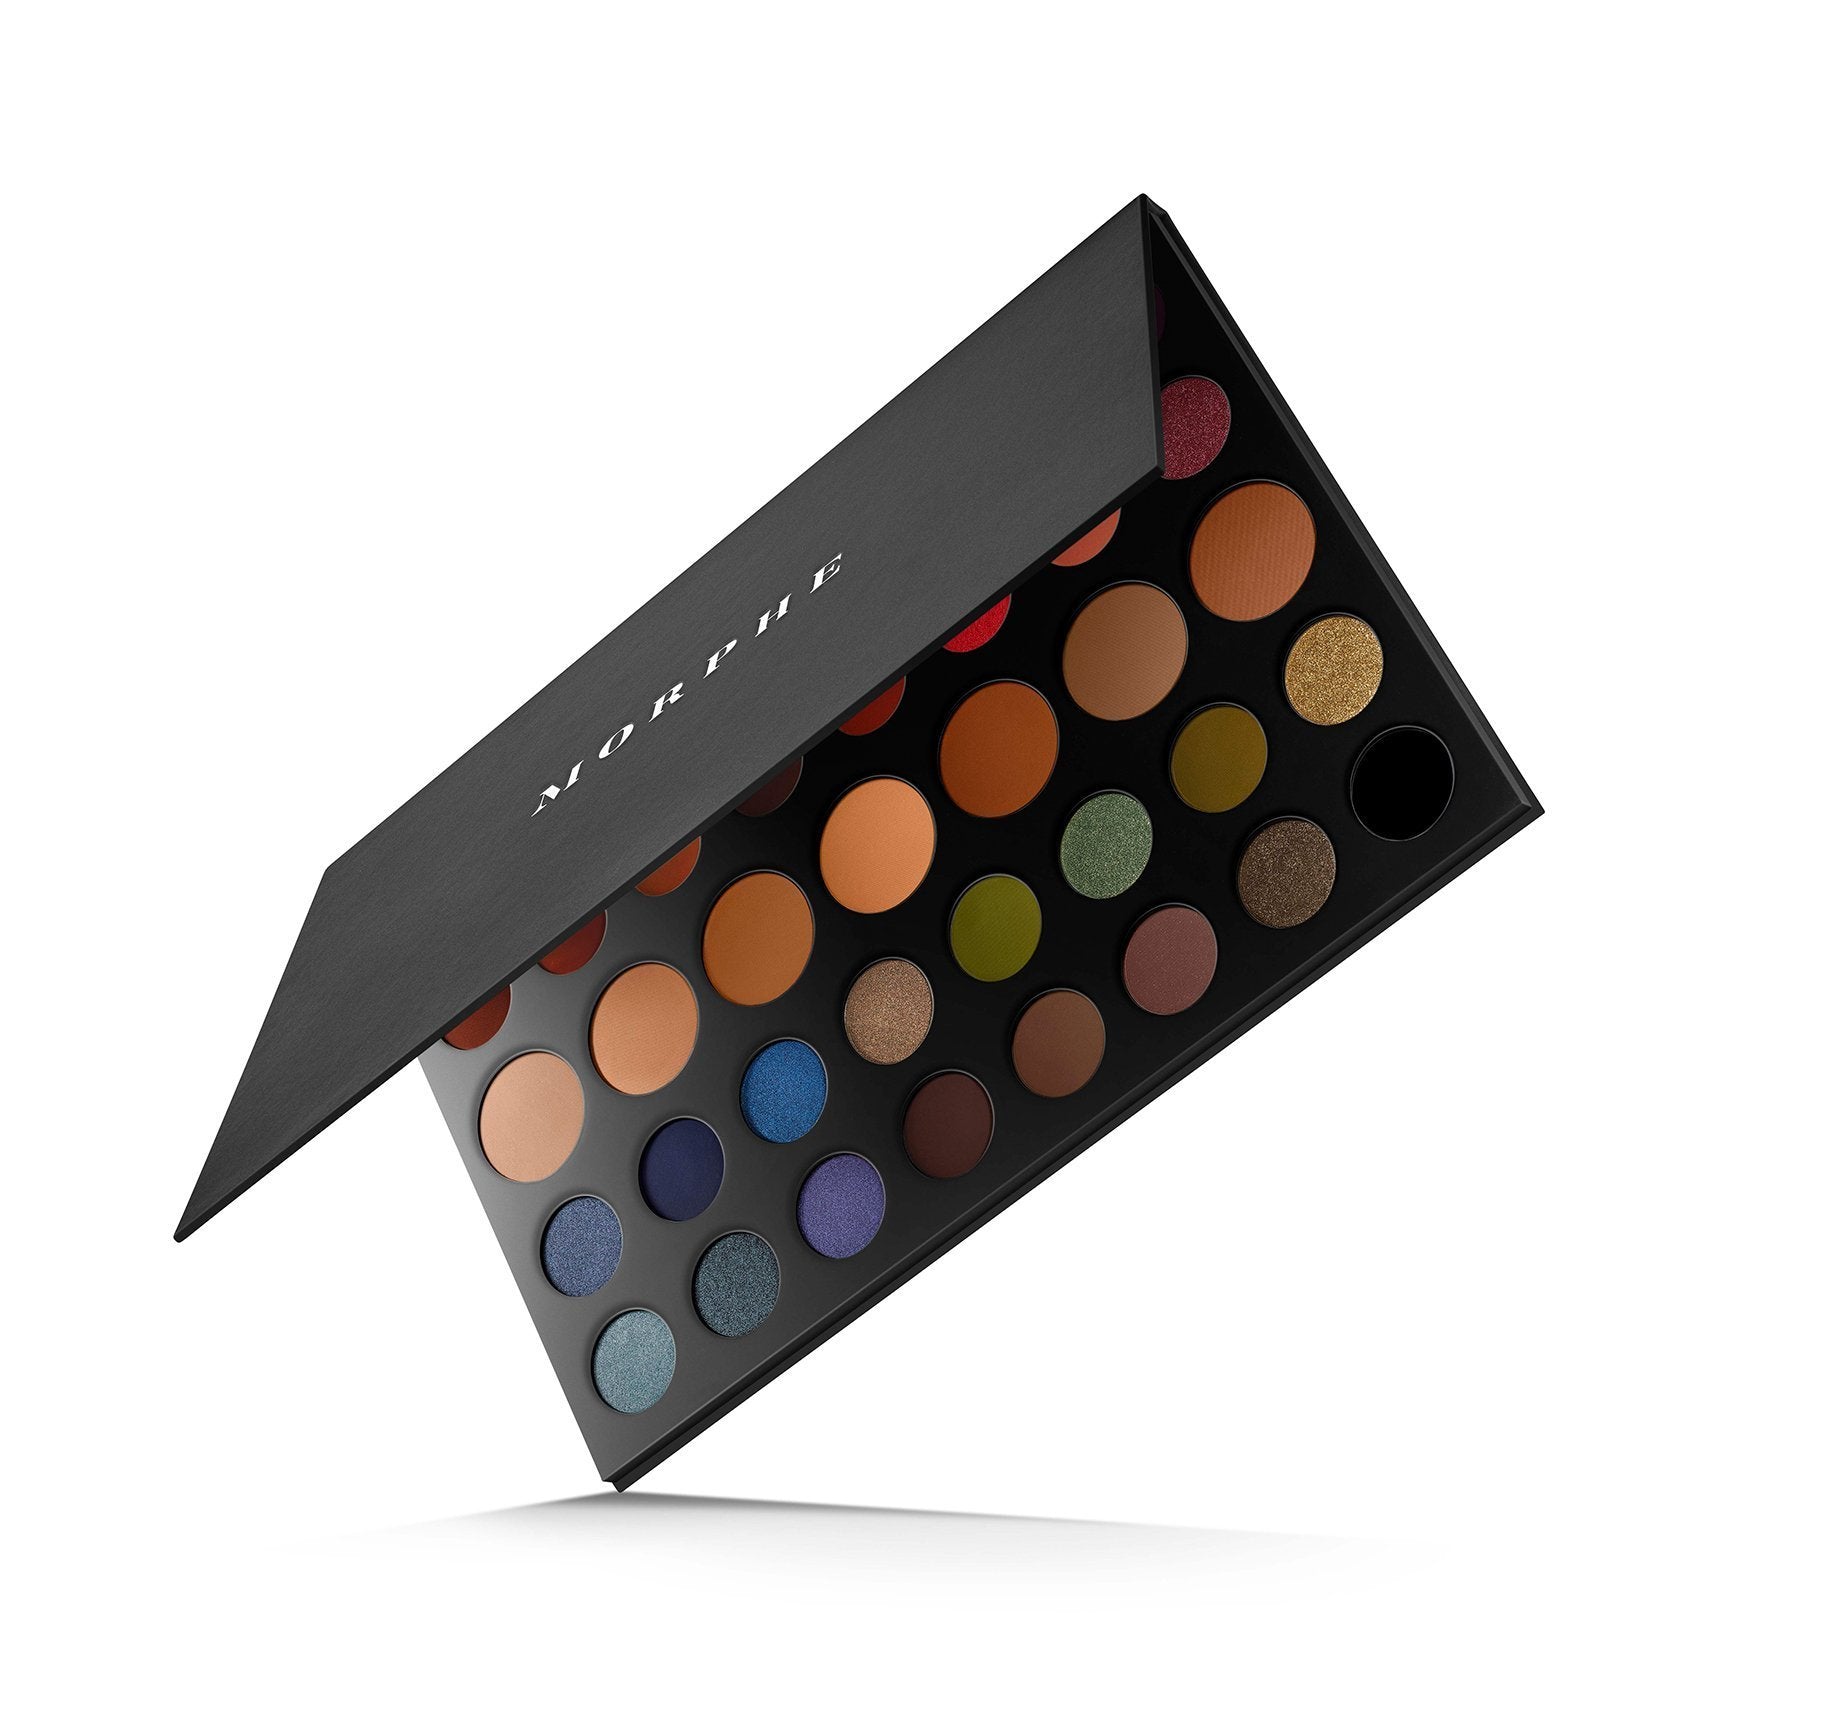 39A Dare To Create Artistry Palette